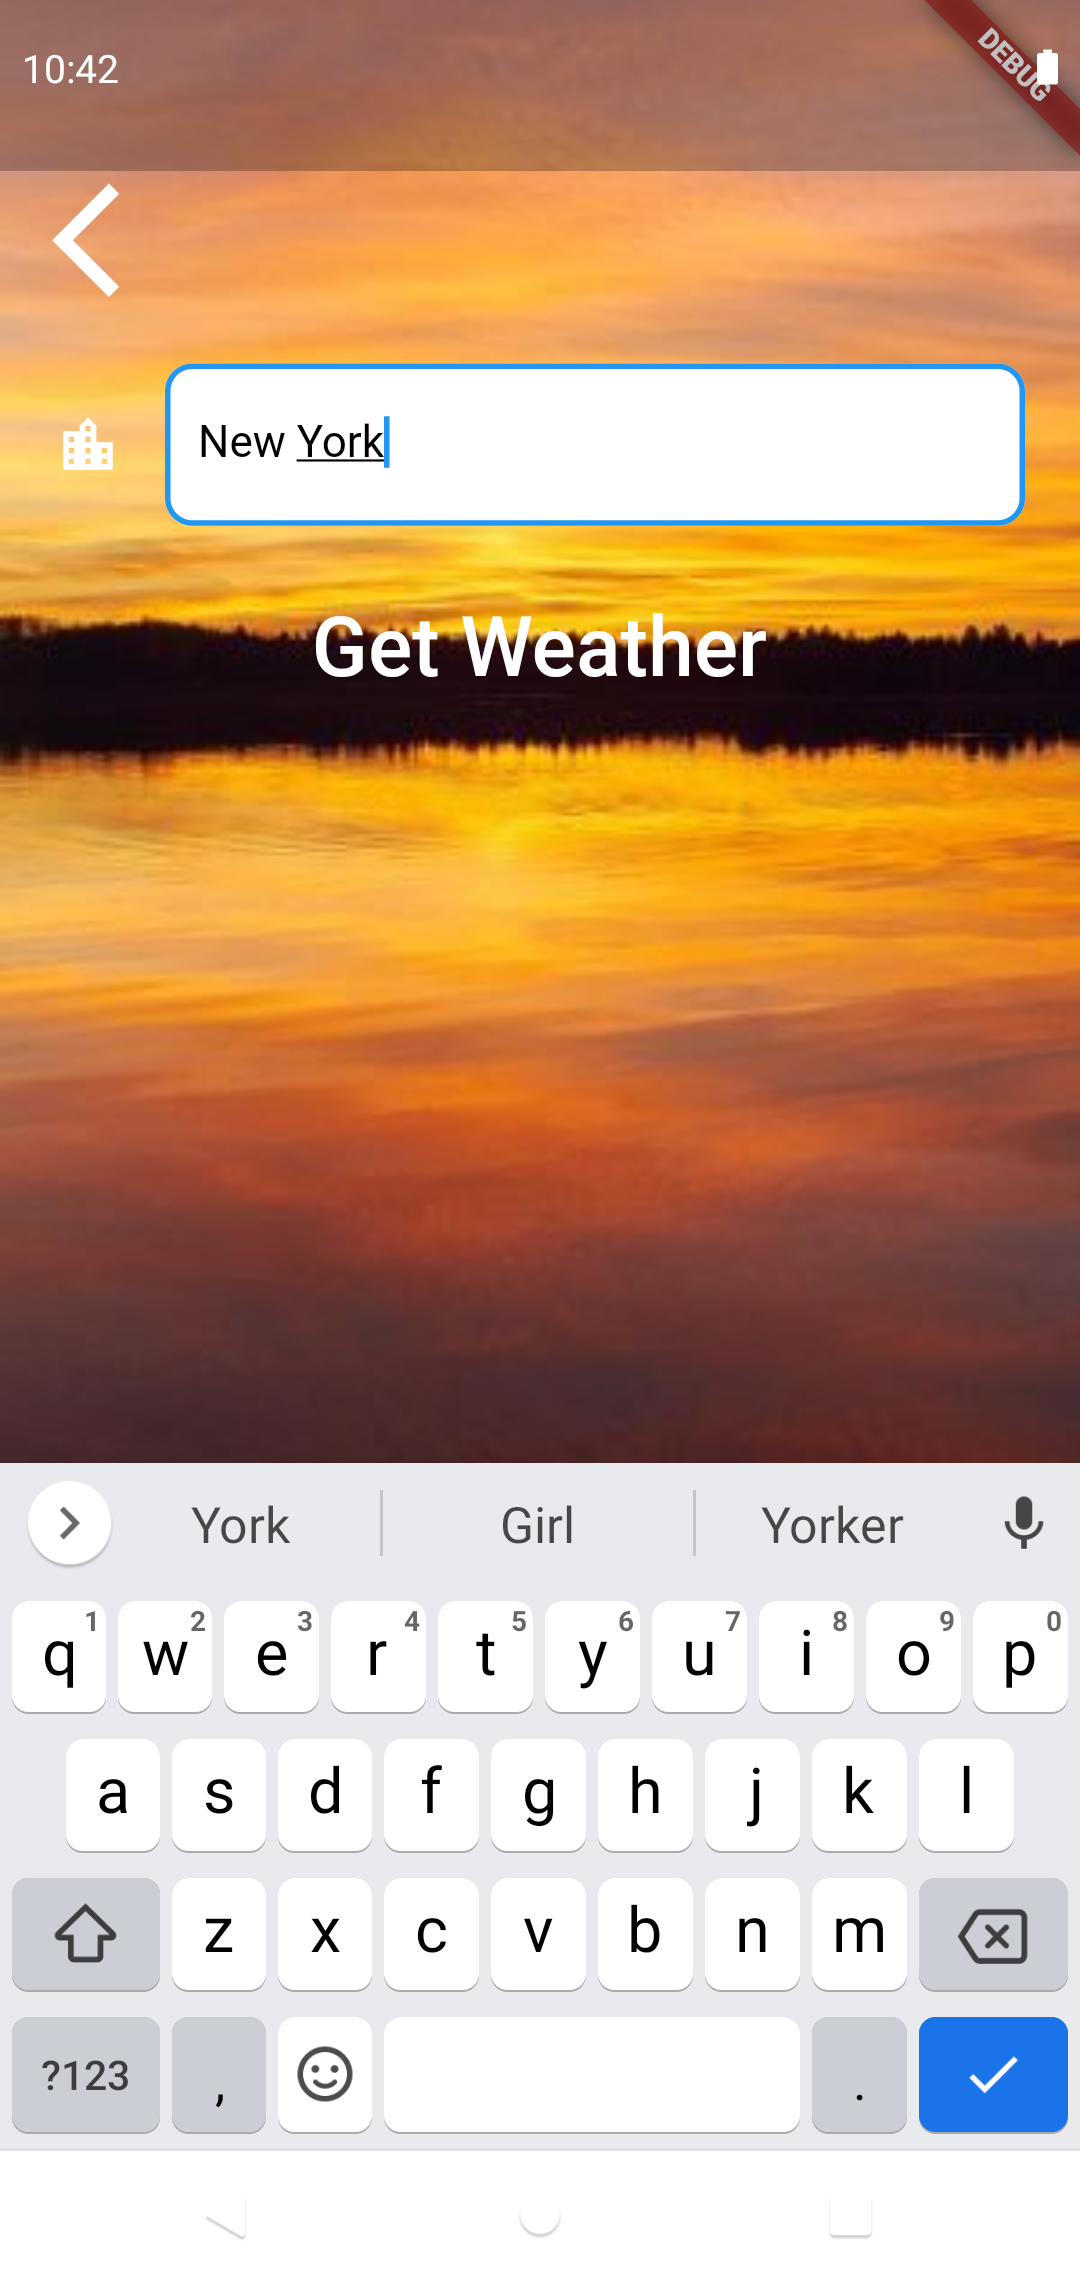 Weather Forecast Application devlopped with Flutter